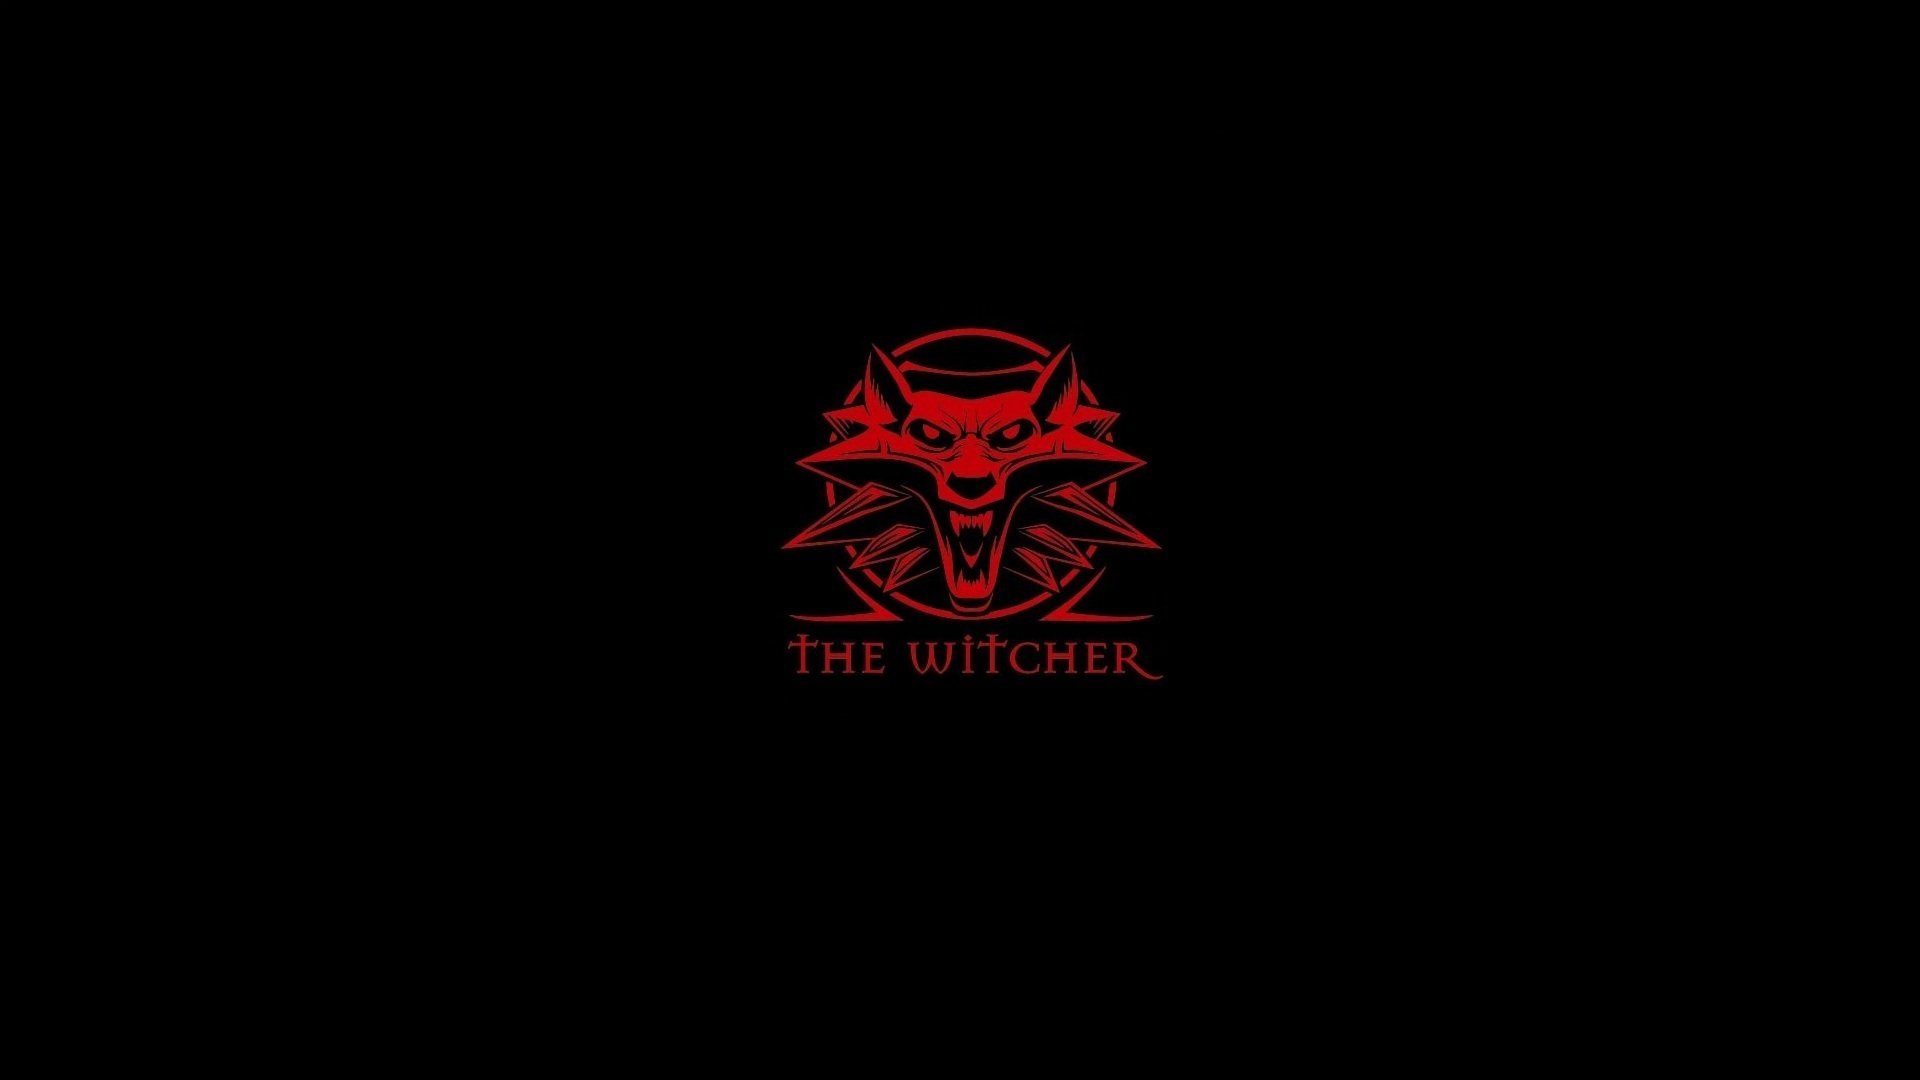 Download full hd 1920x1080 The Witcher PC background ID:130126 for free